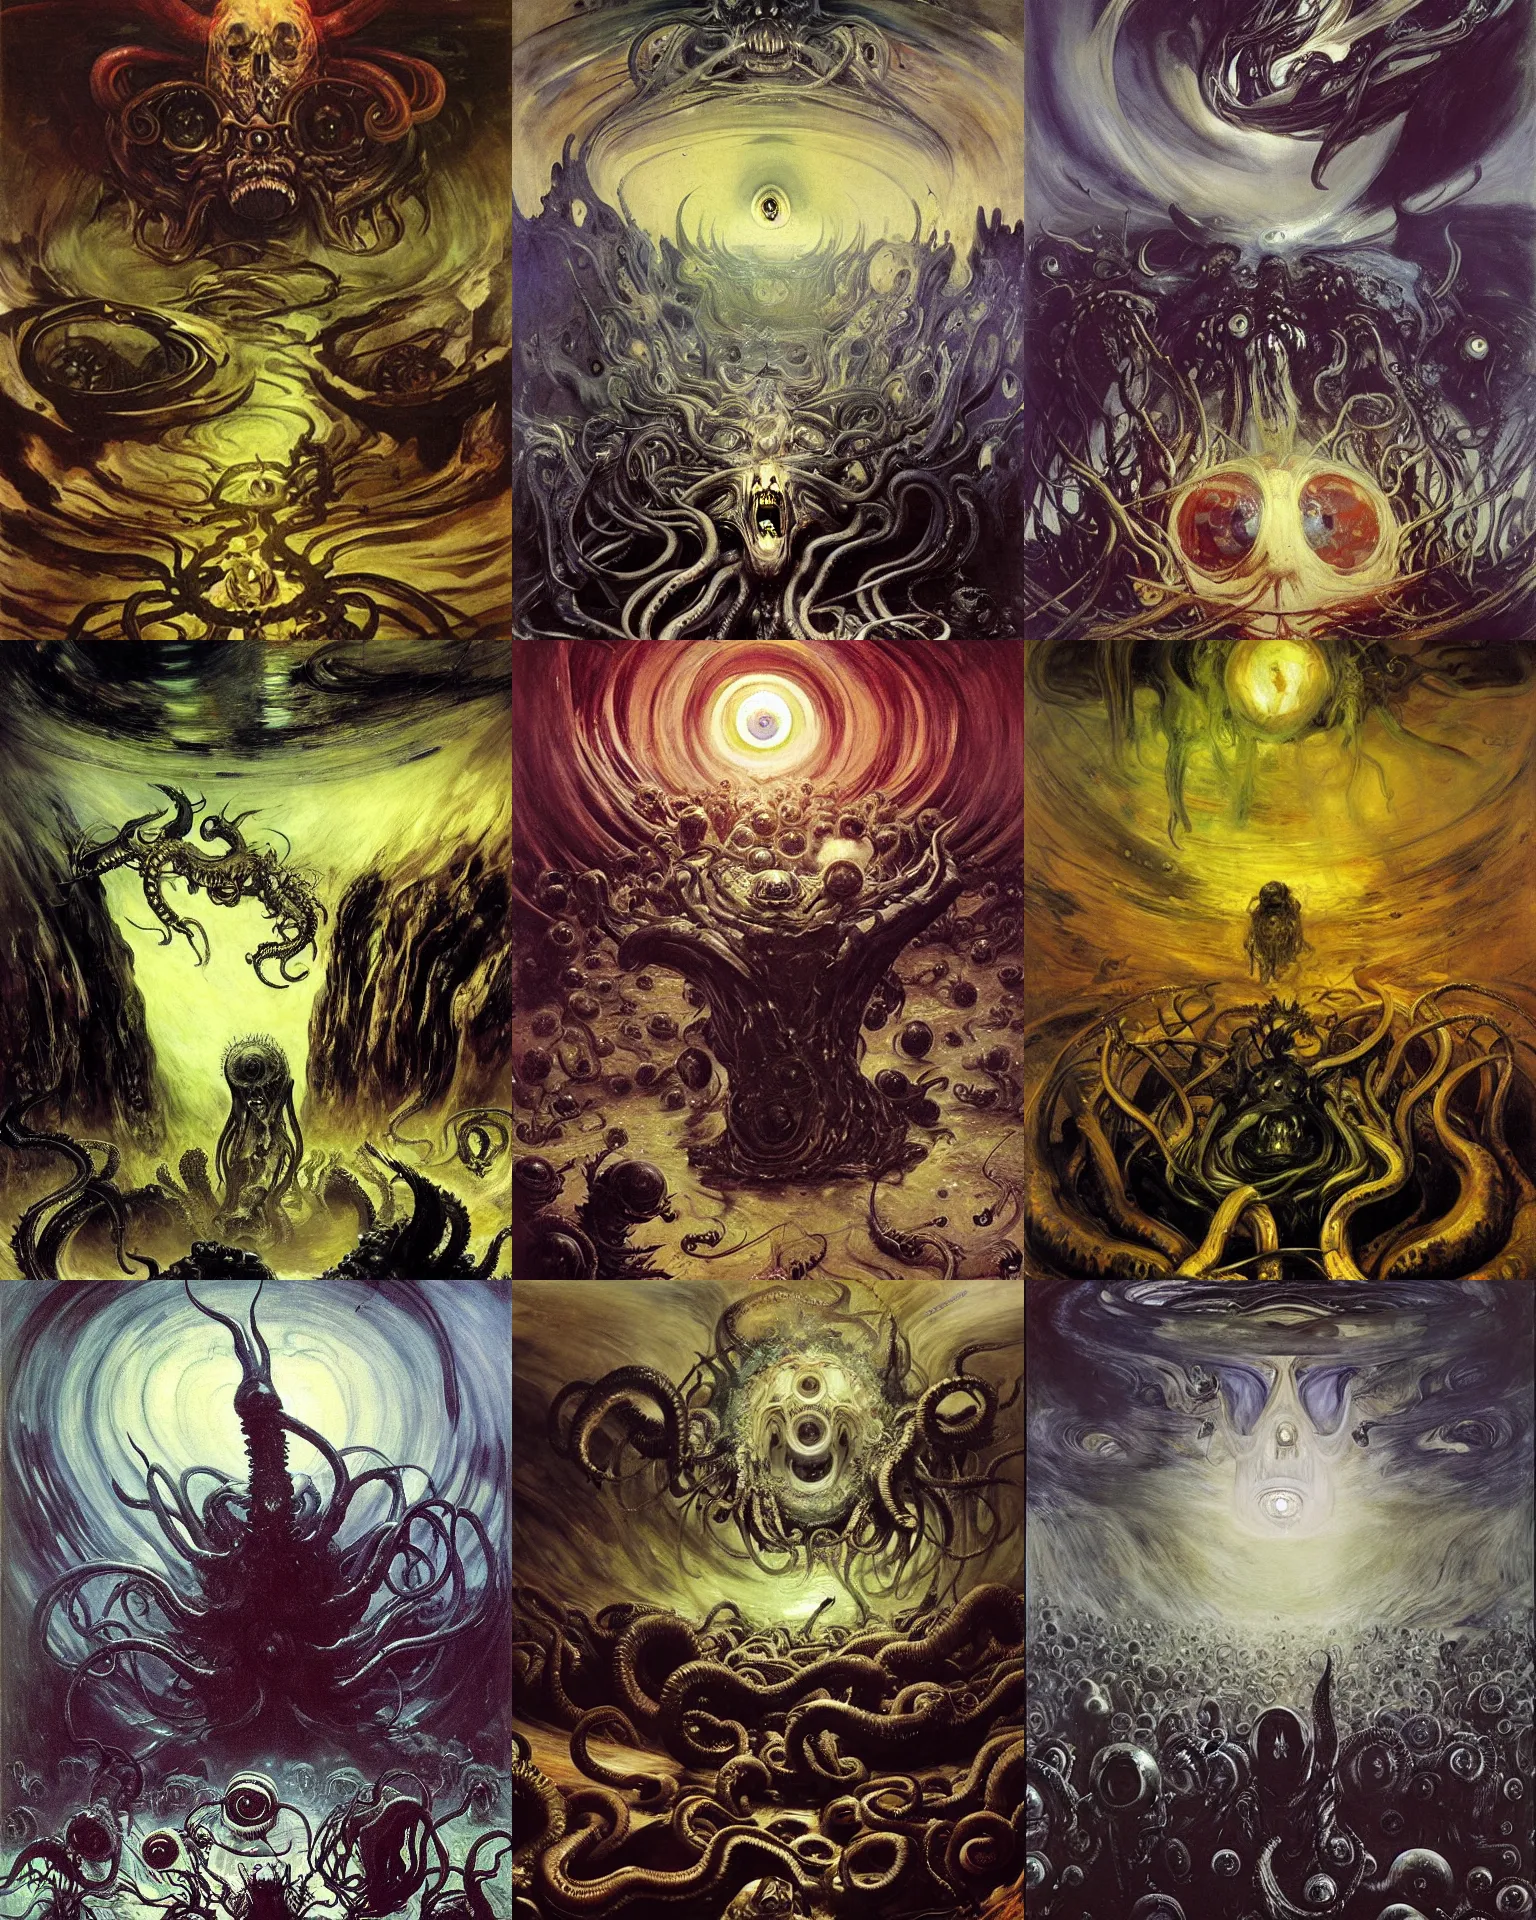 Prompt: ritual of otherworldly massive cthulu god arising a grim obsidian landscape made of giant eyeballs, painting by joaquin sorolla, edvard munch john berkey, gustave dore, thomas moran, hieronymus bosch, hp lovecraft, paranoid vibe, terror giant infinite eyes horror spider eyes tentacles maggots feeling of madness and insanity